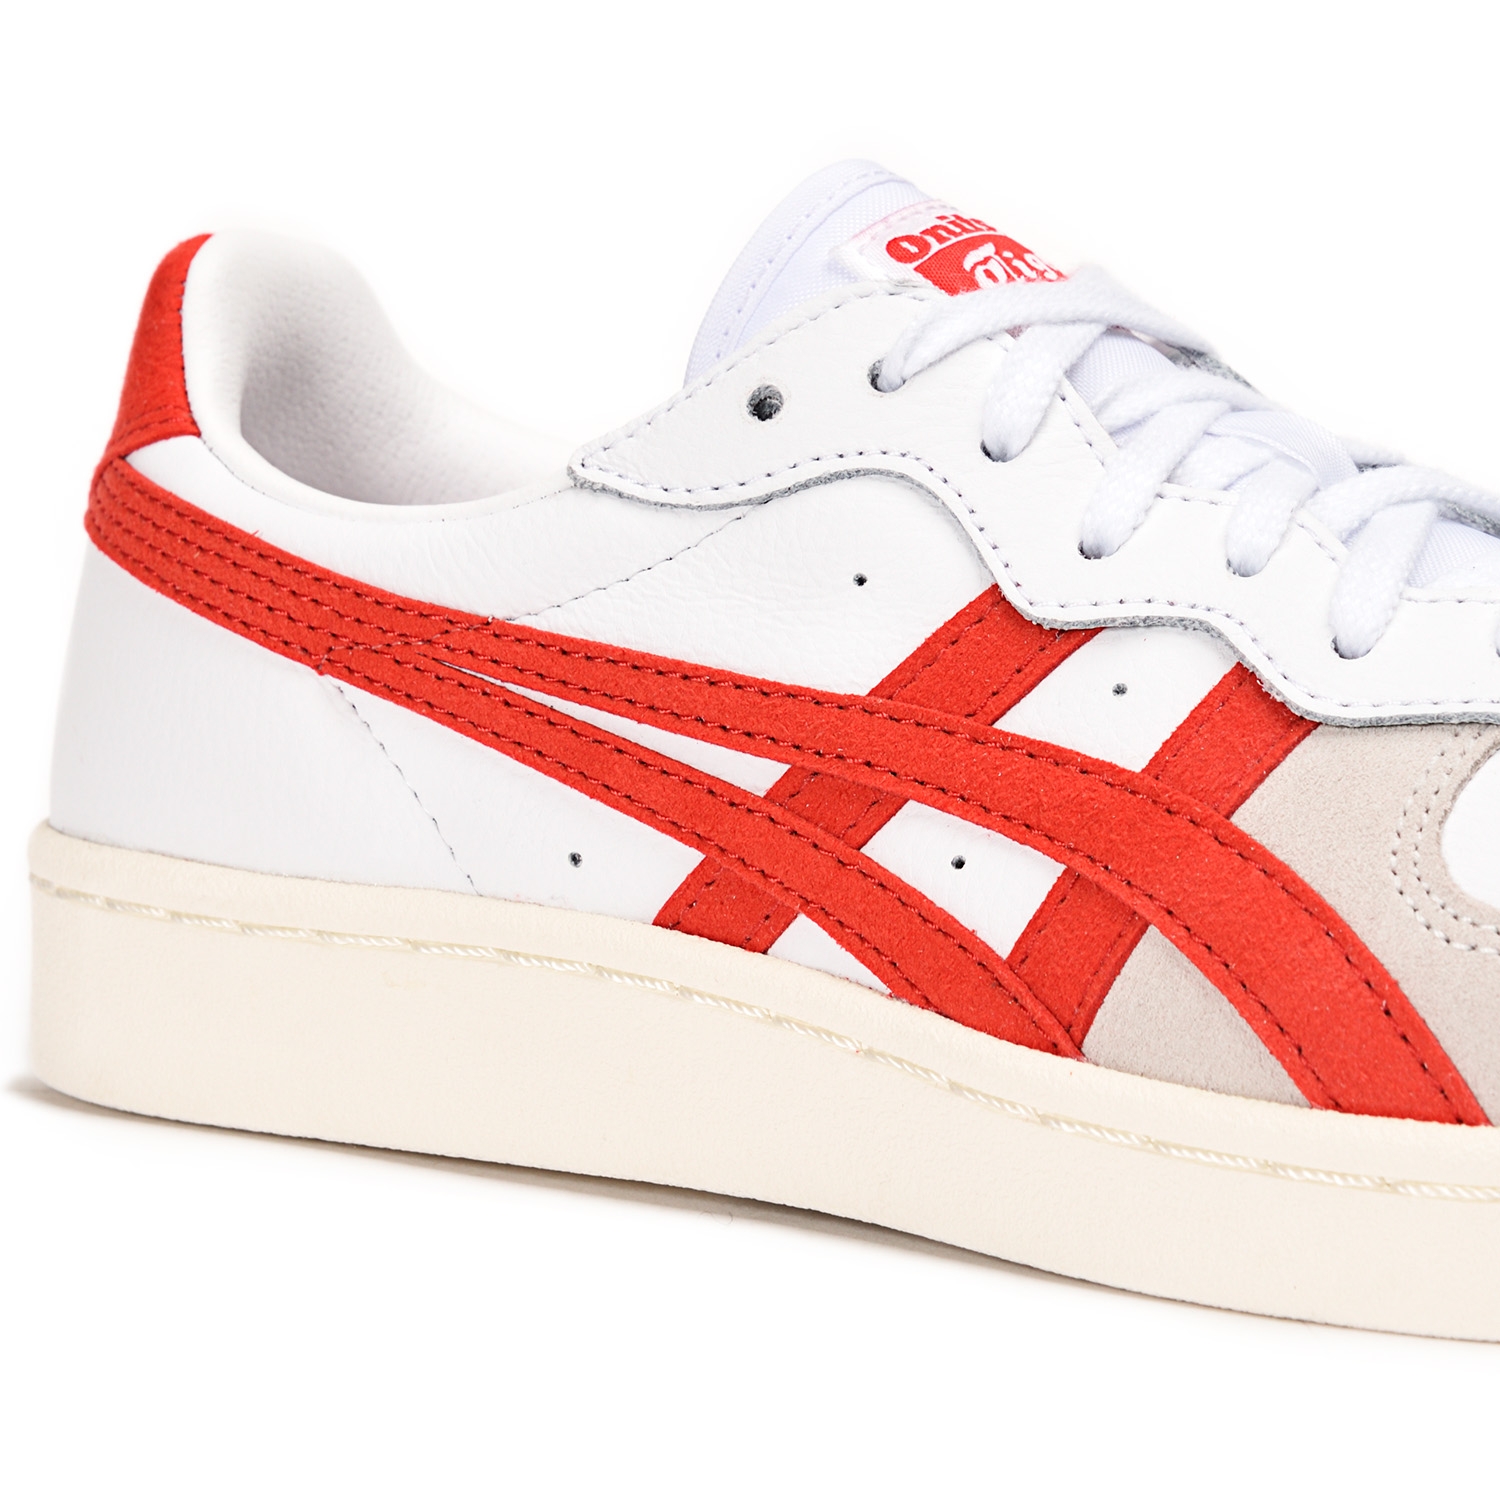 onitsuka tiger GSM white/classic red